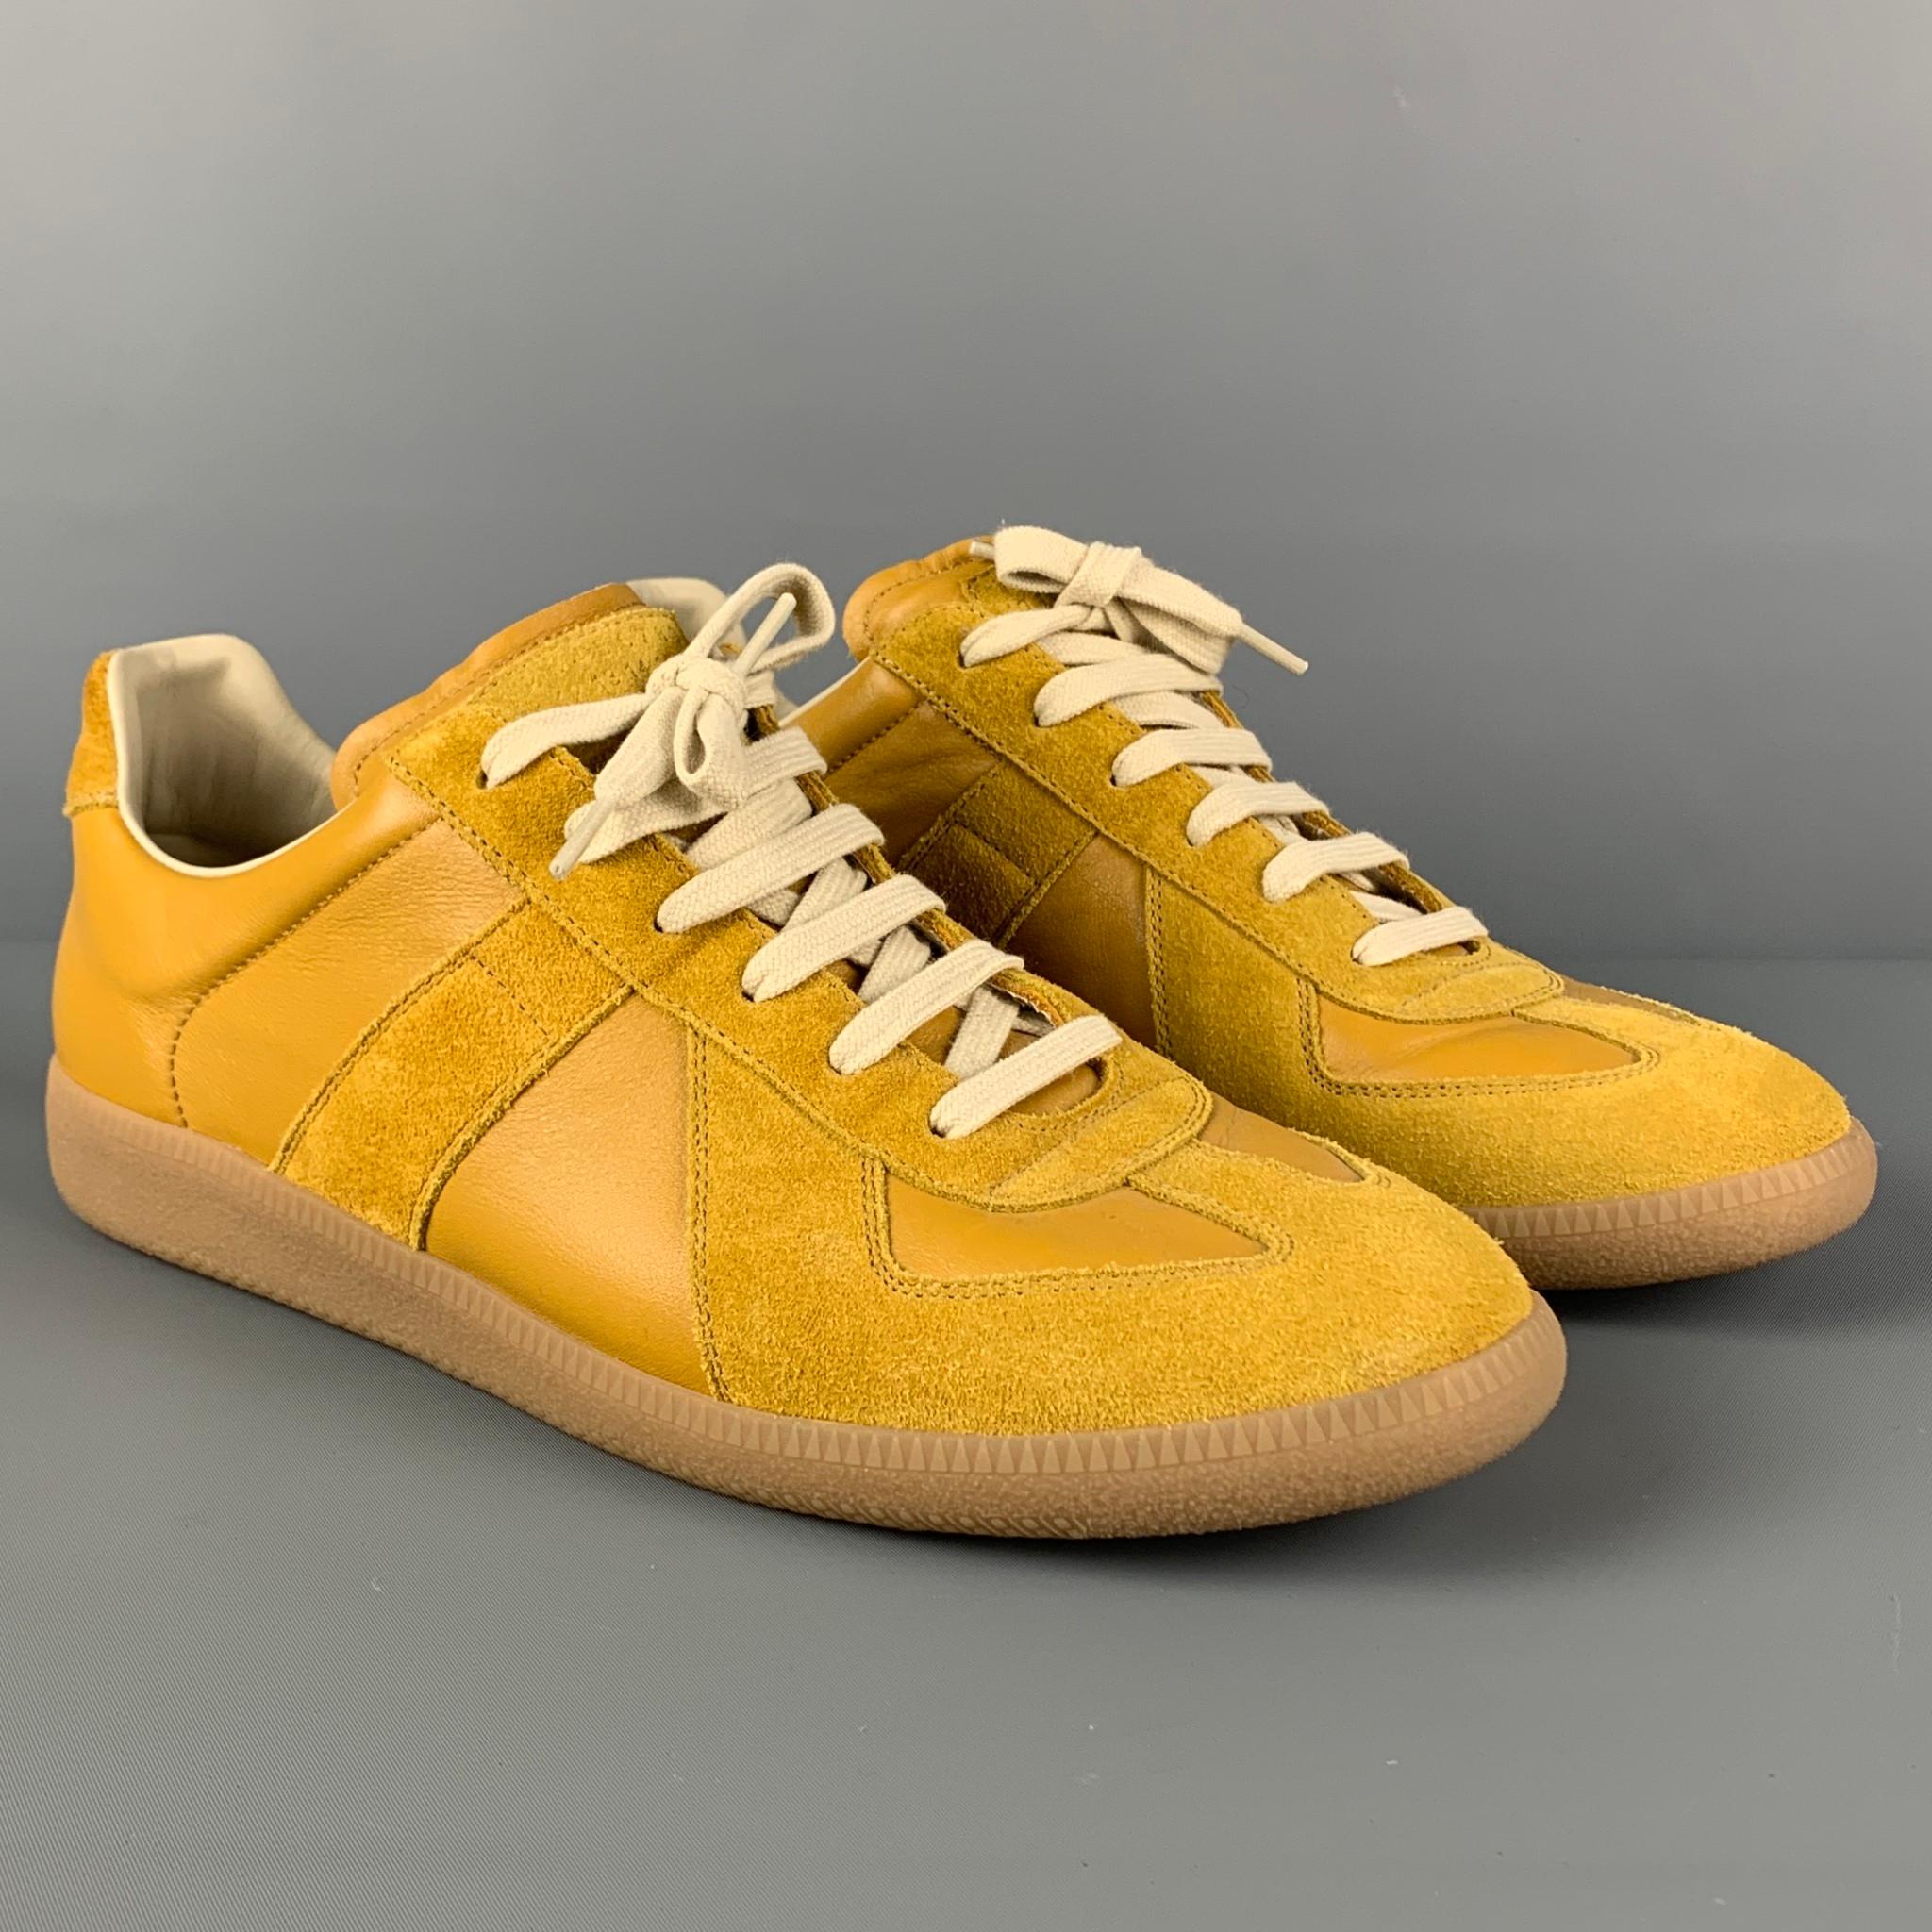 MAISON MARGIELA 'Replica' sneakers comes in a mustard leather featuring a rubber sole and a lace up closure. Includes box. Made in Italy. 

Very Good Pre-Owned Condition.
Marked: 45
Original Retail Price: $540.00

Outsole: 12.25 in. x 4 in. 